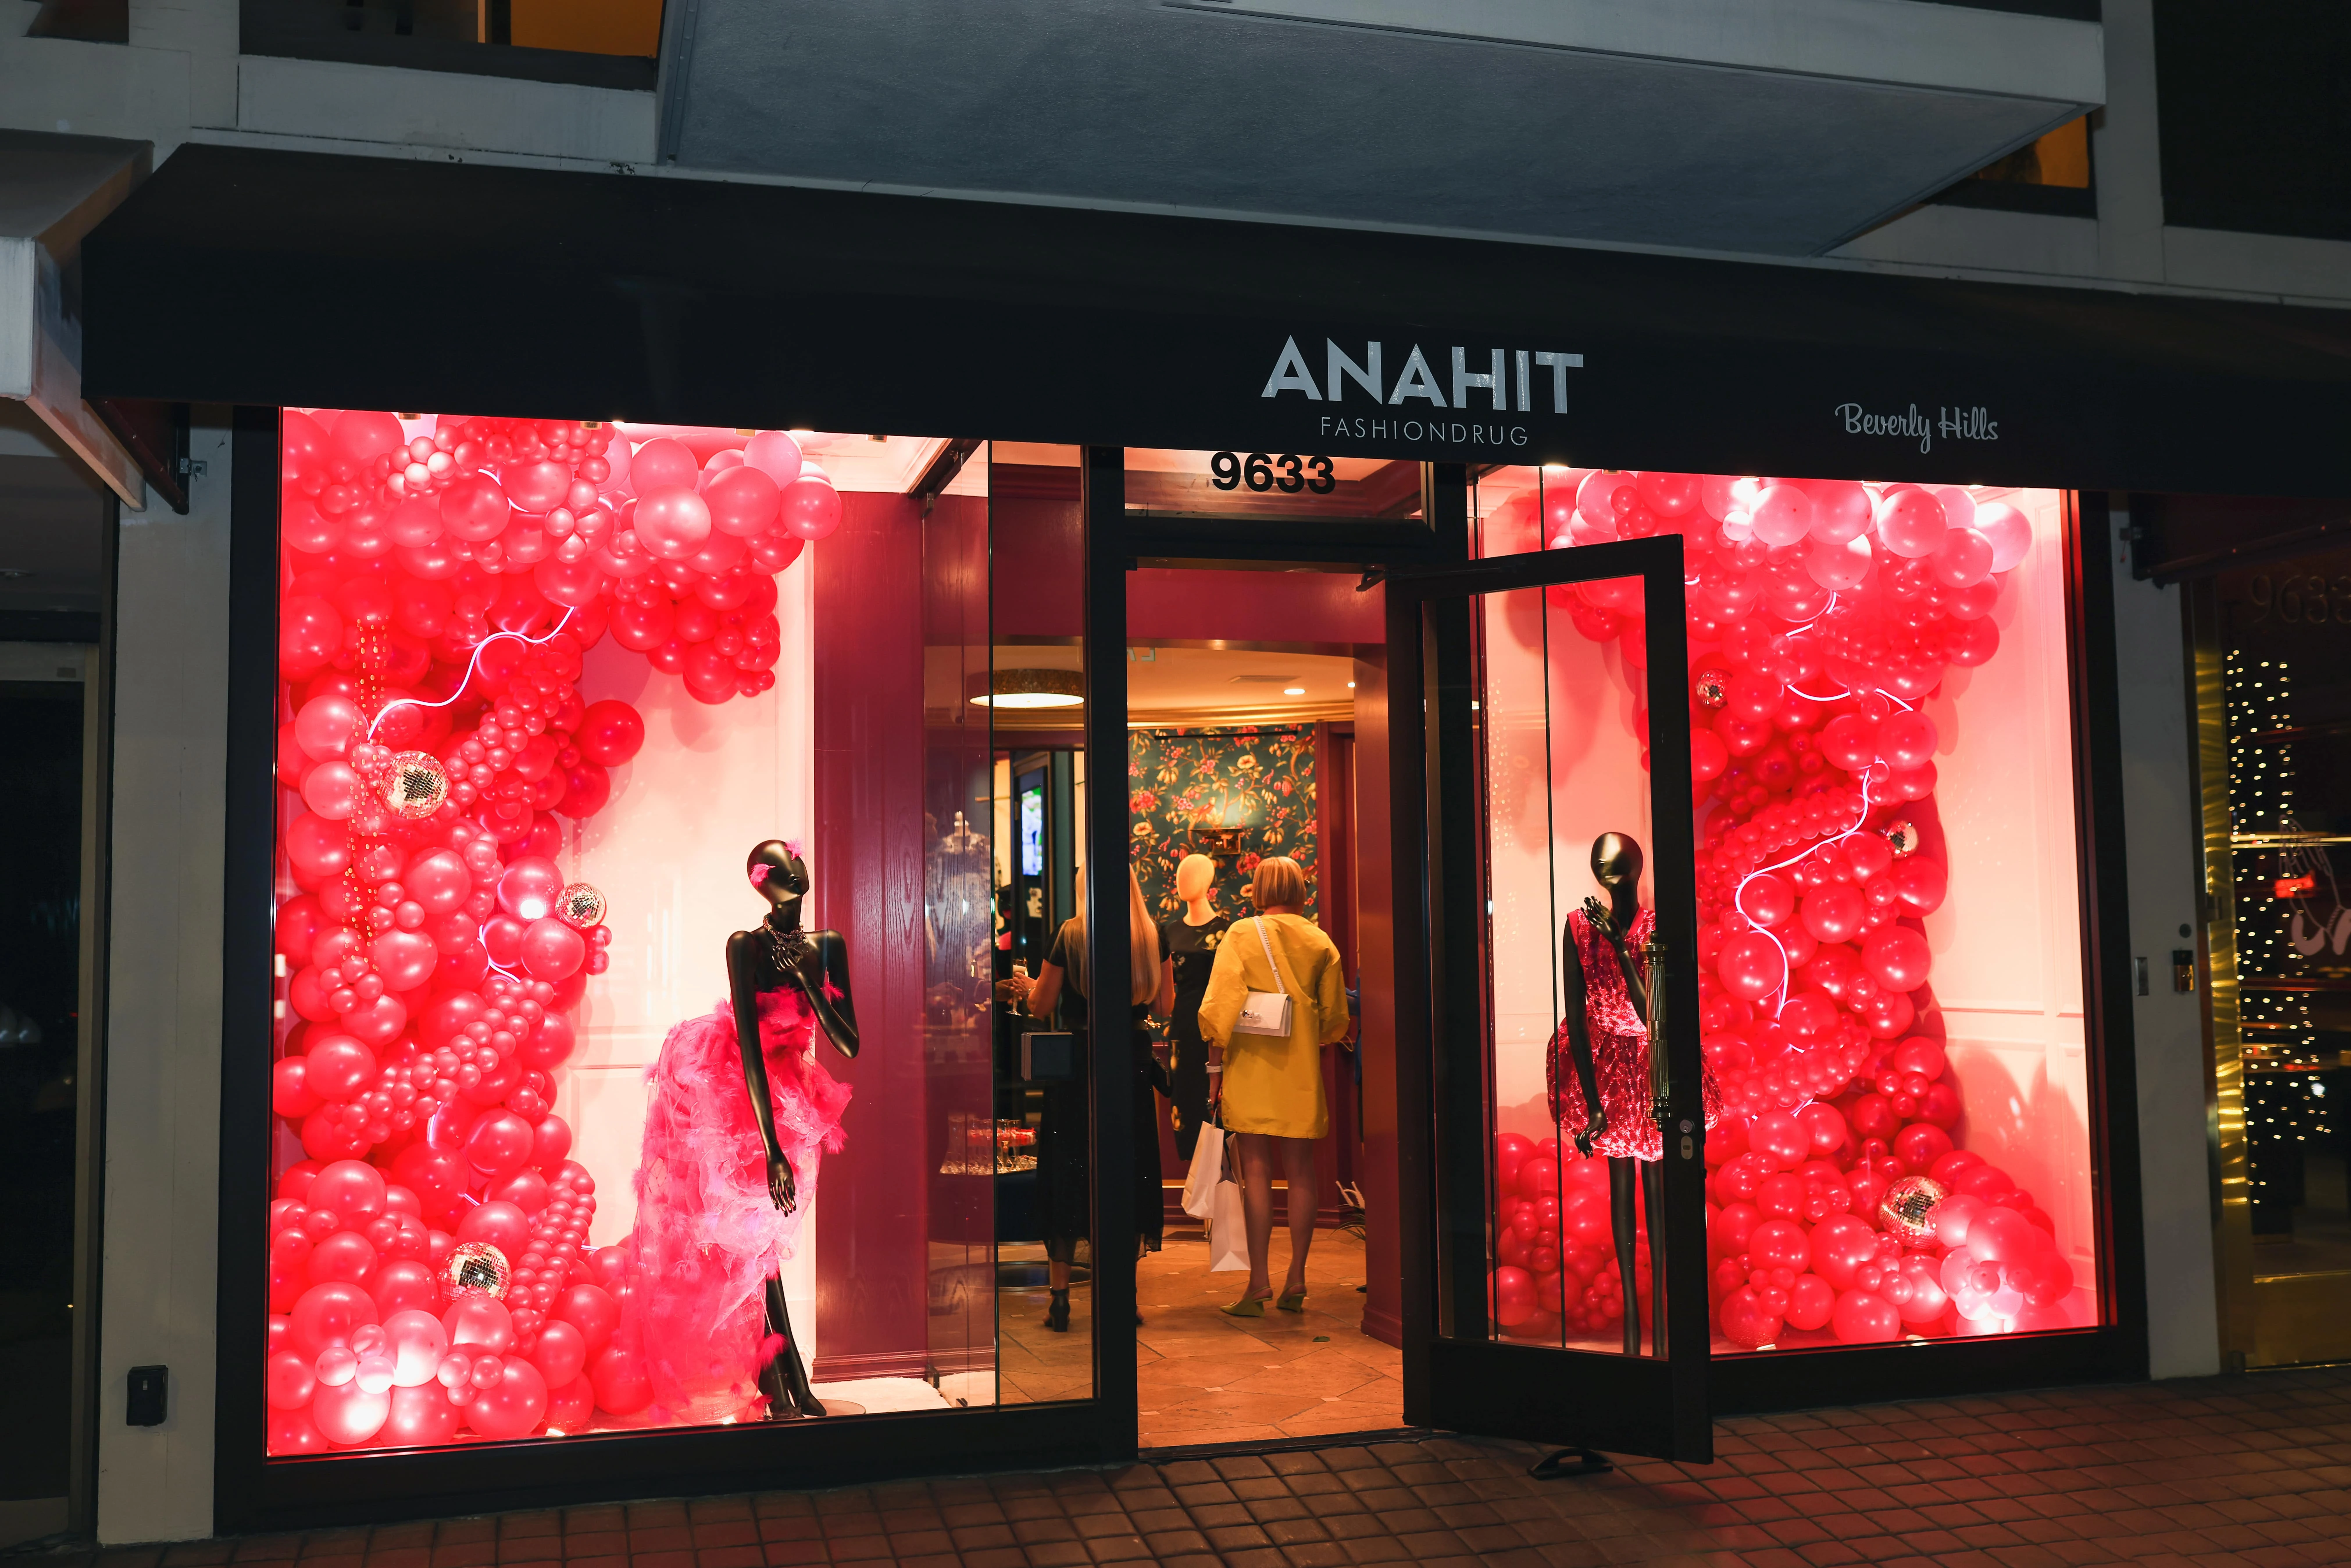 Anahit Fashiondrug House Hosts Star-Studded Soft Opening in Beverly Hills